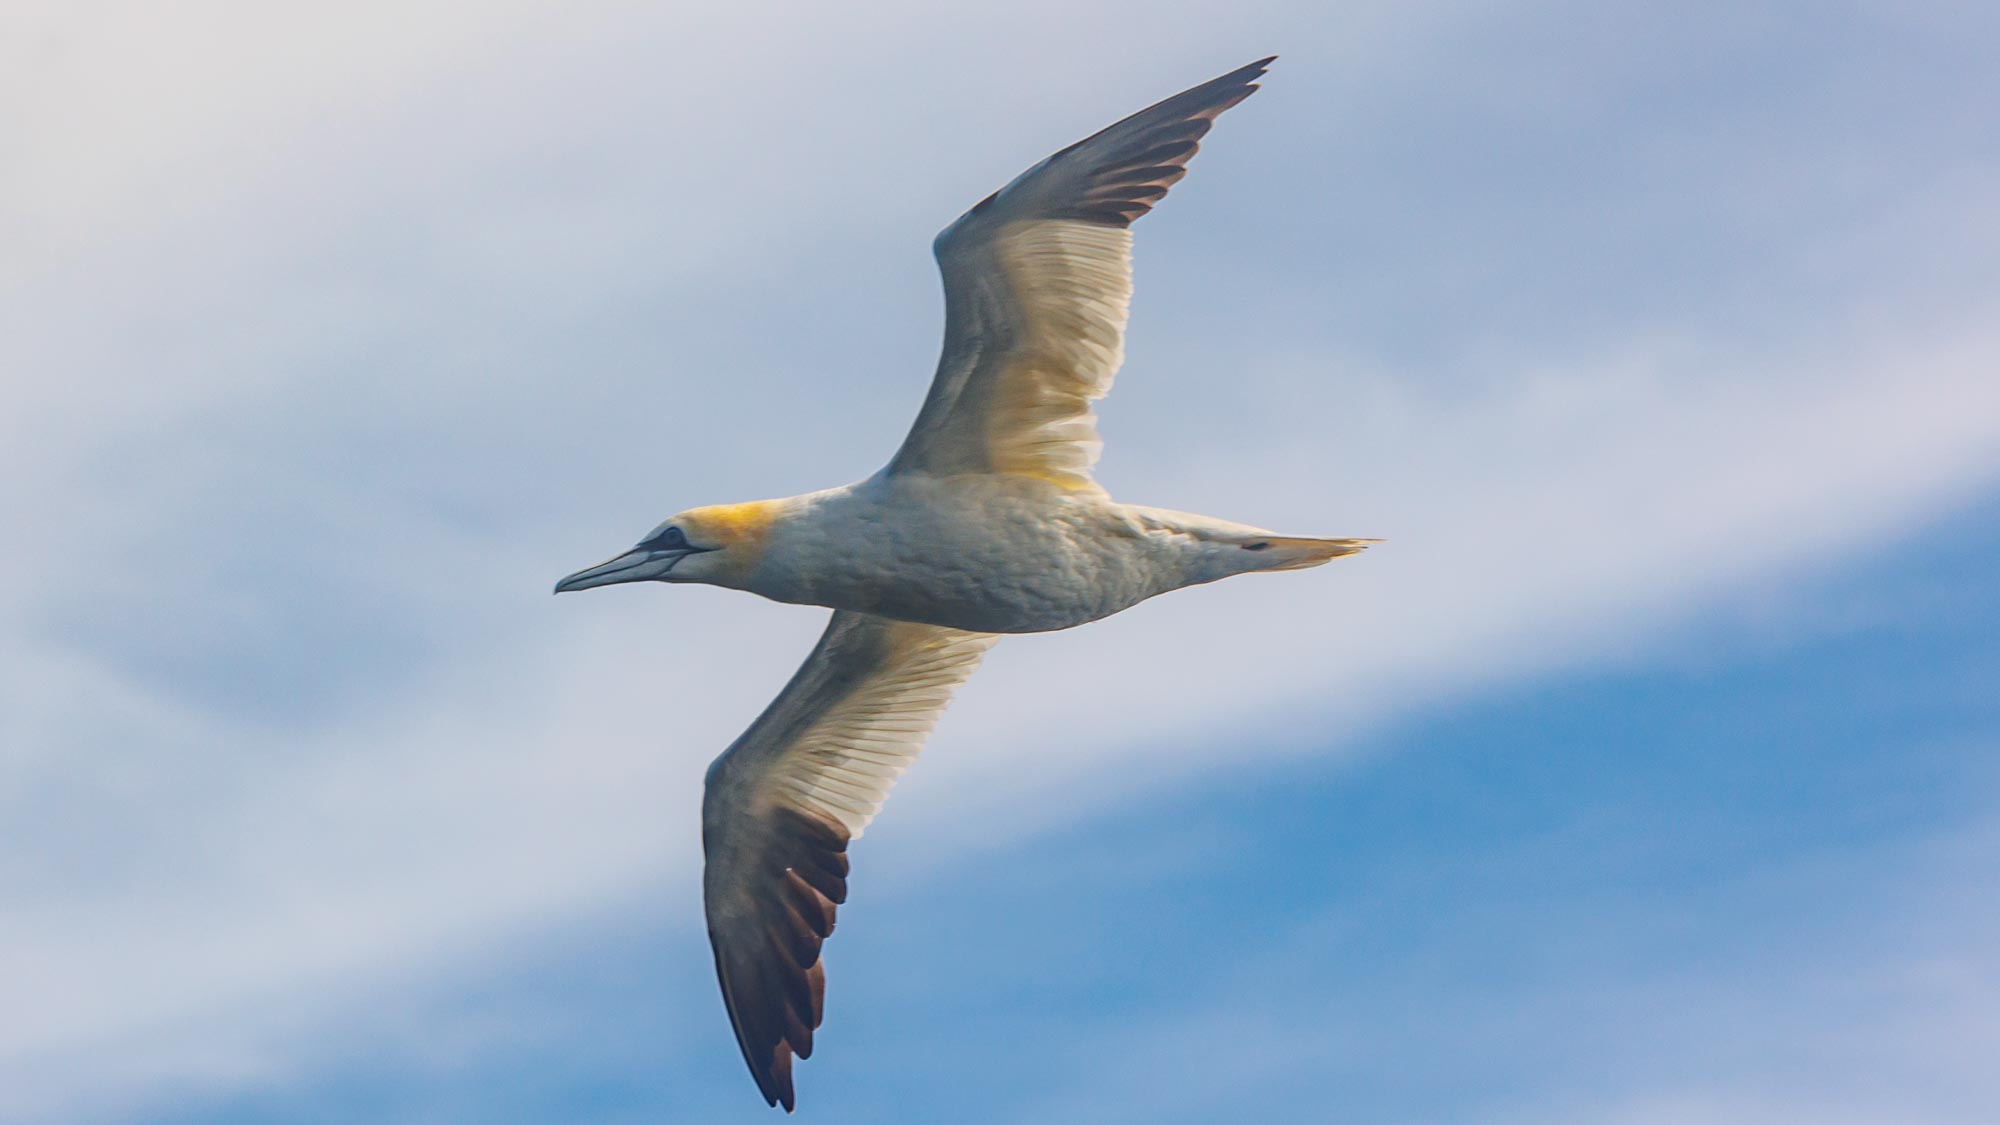 shows a gannet (sea bird) flying from left to right. the Gannet has black wing tips, wings made for soaring and a vicious bill on a head topped with yellow